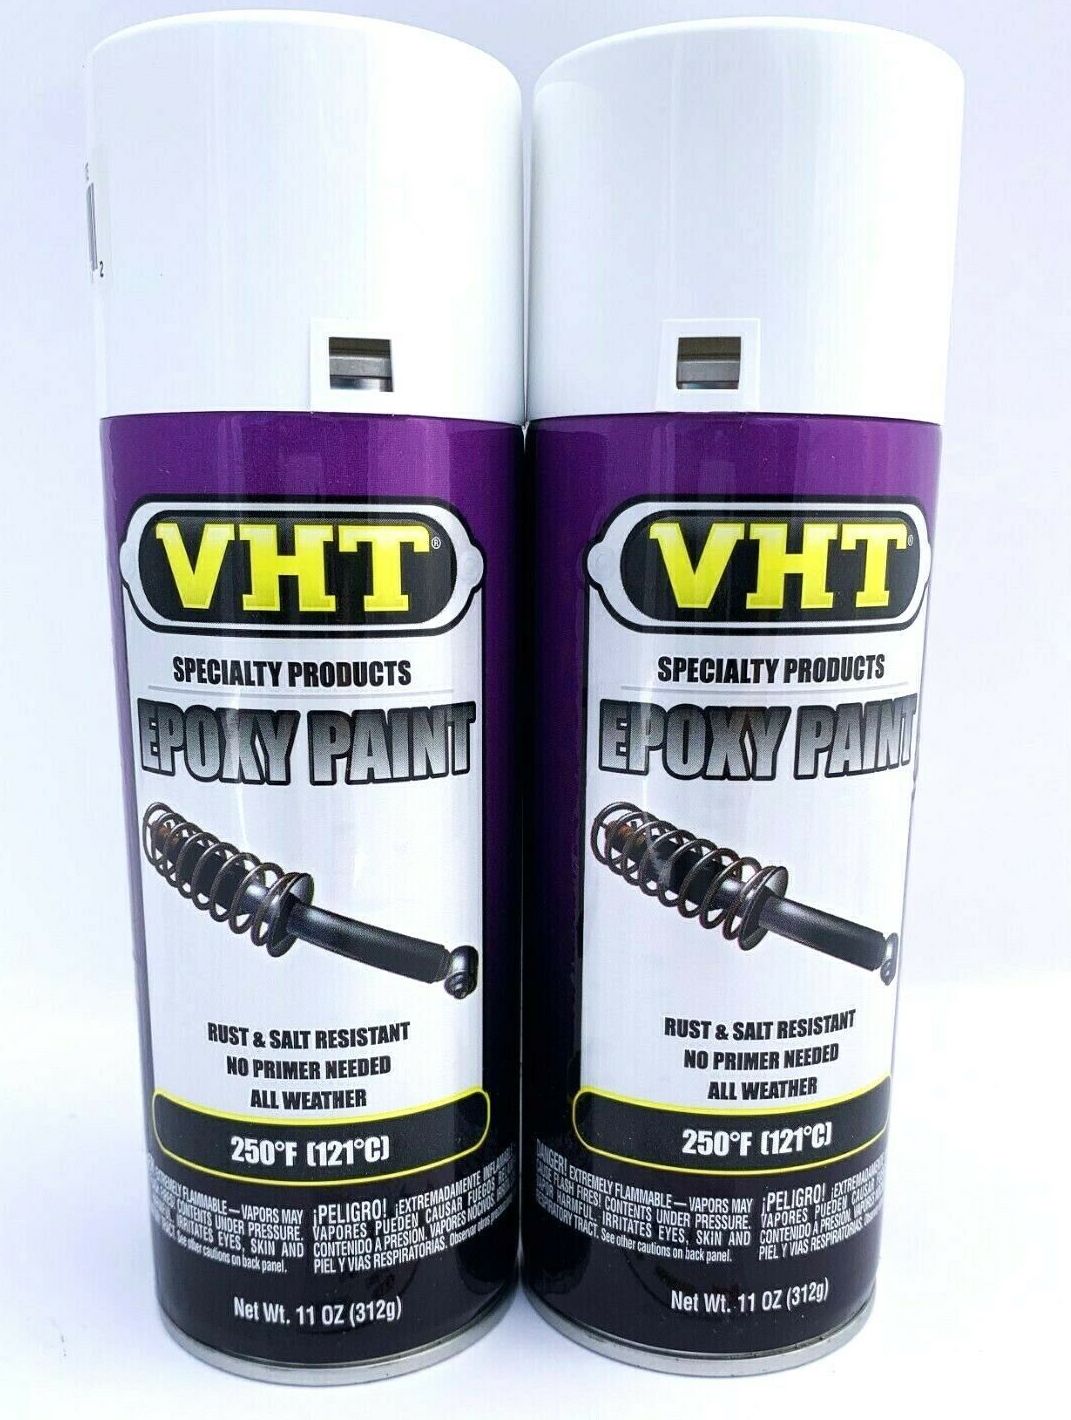 VHT SP651-2 PACK GLOSS WHITE Epoxy Paint. Rust and Salt Resistant - 11 oz